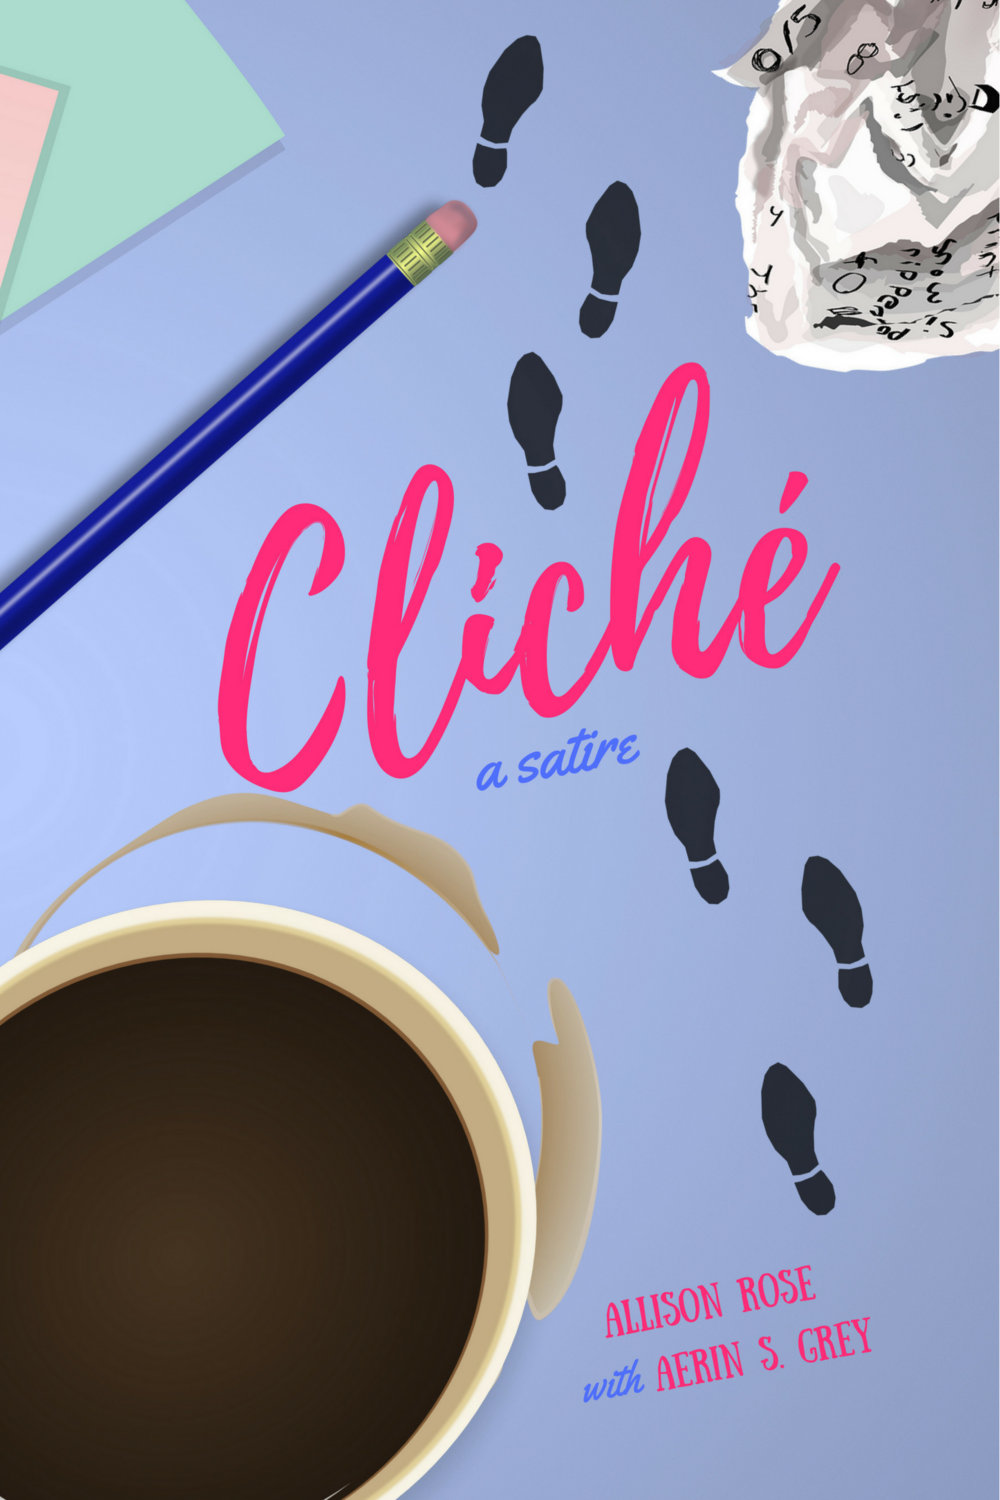 Cliche (Paperback), signed by author Allison Rose